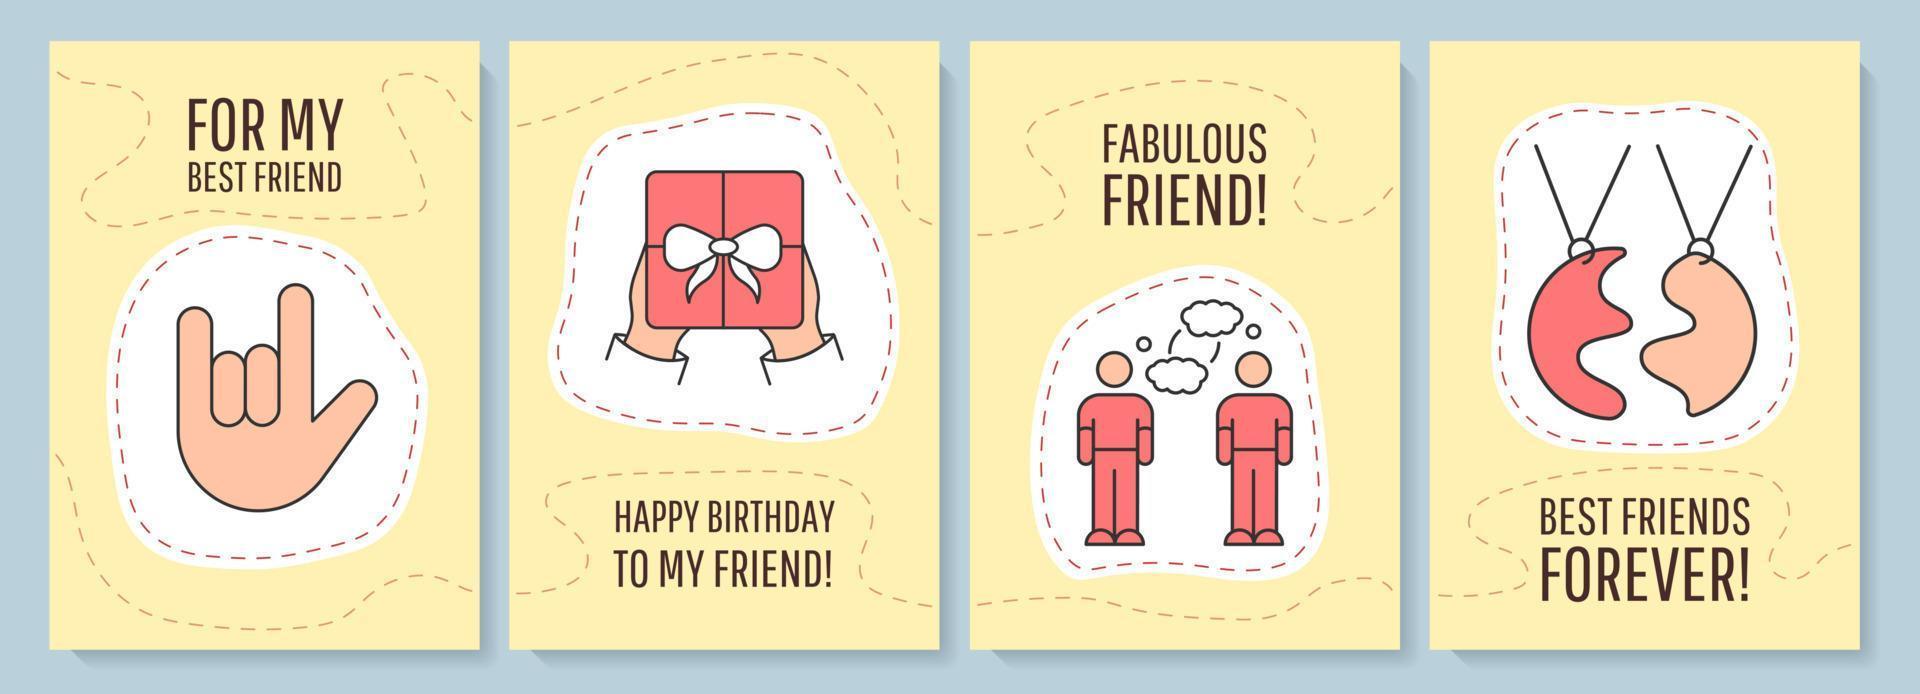 Friendship greeting card with color icon element set. Bond and relation with friend. Postcard vector design. Decorative flyer with creative illustration. Notecard with congratulatory message